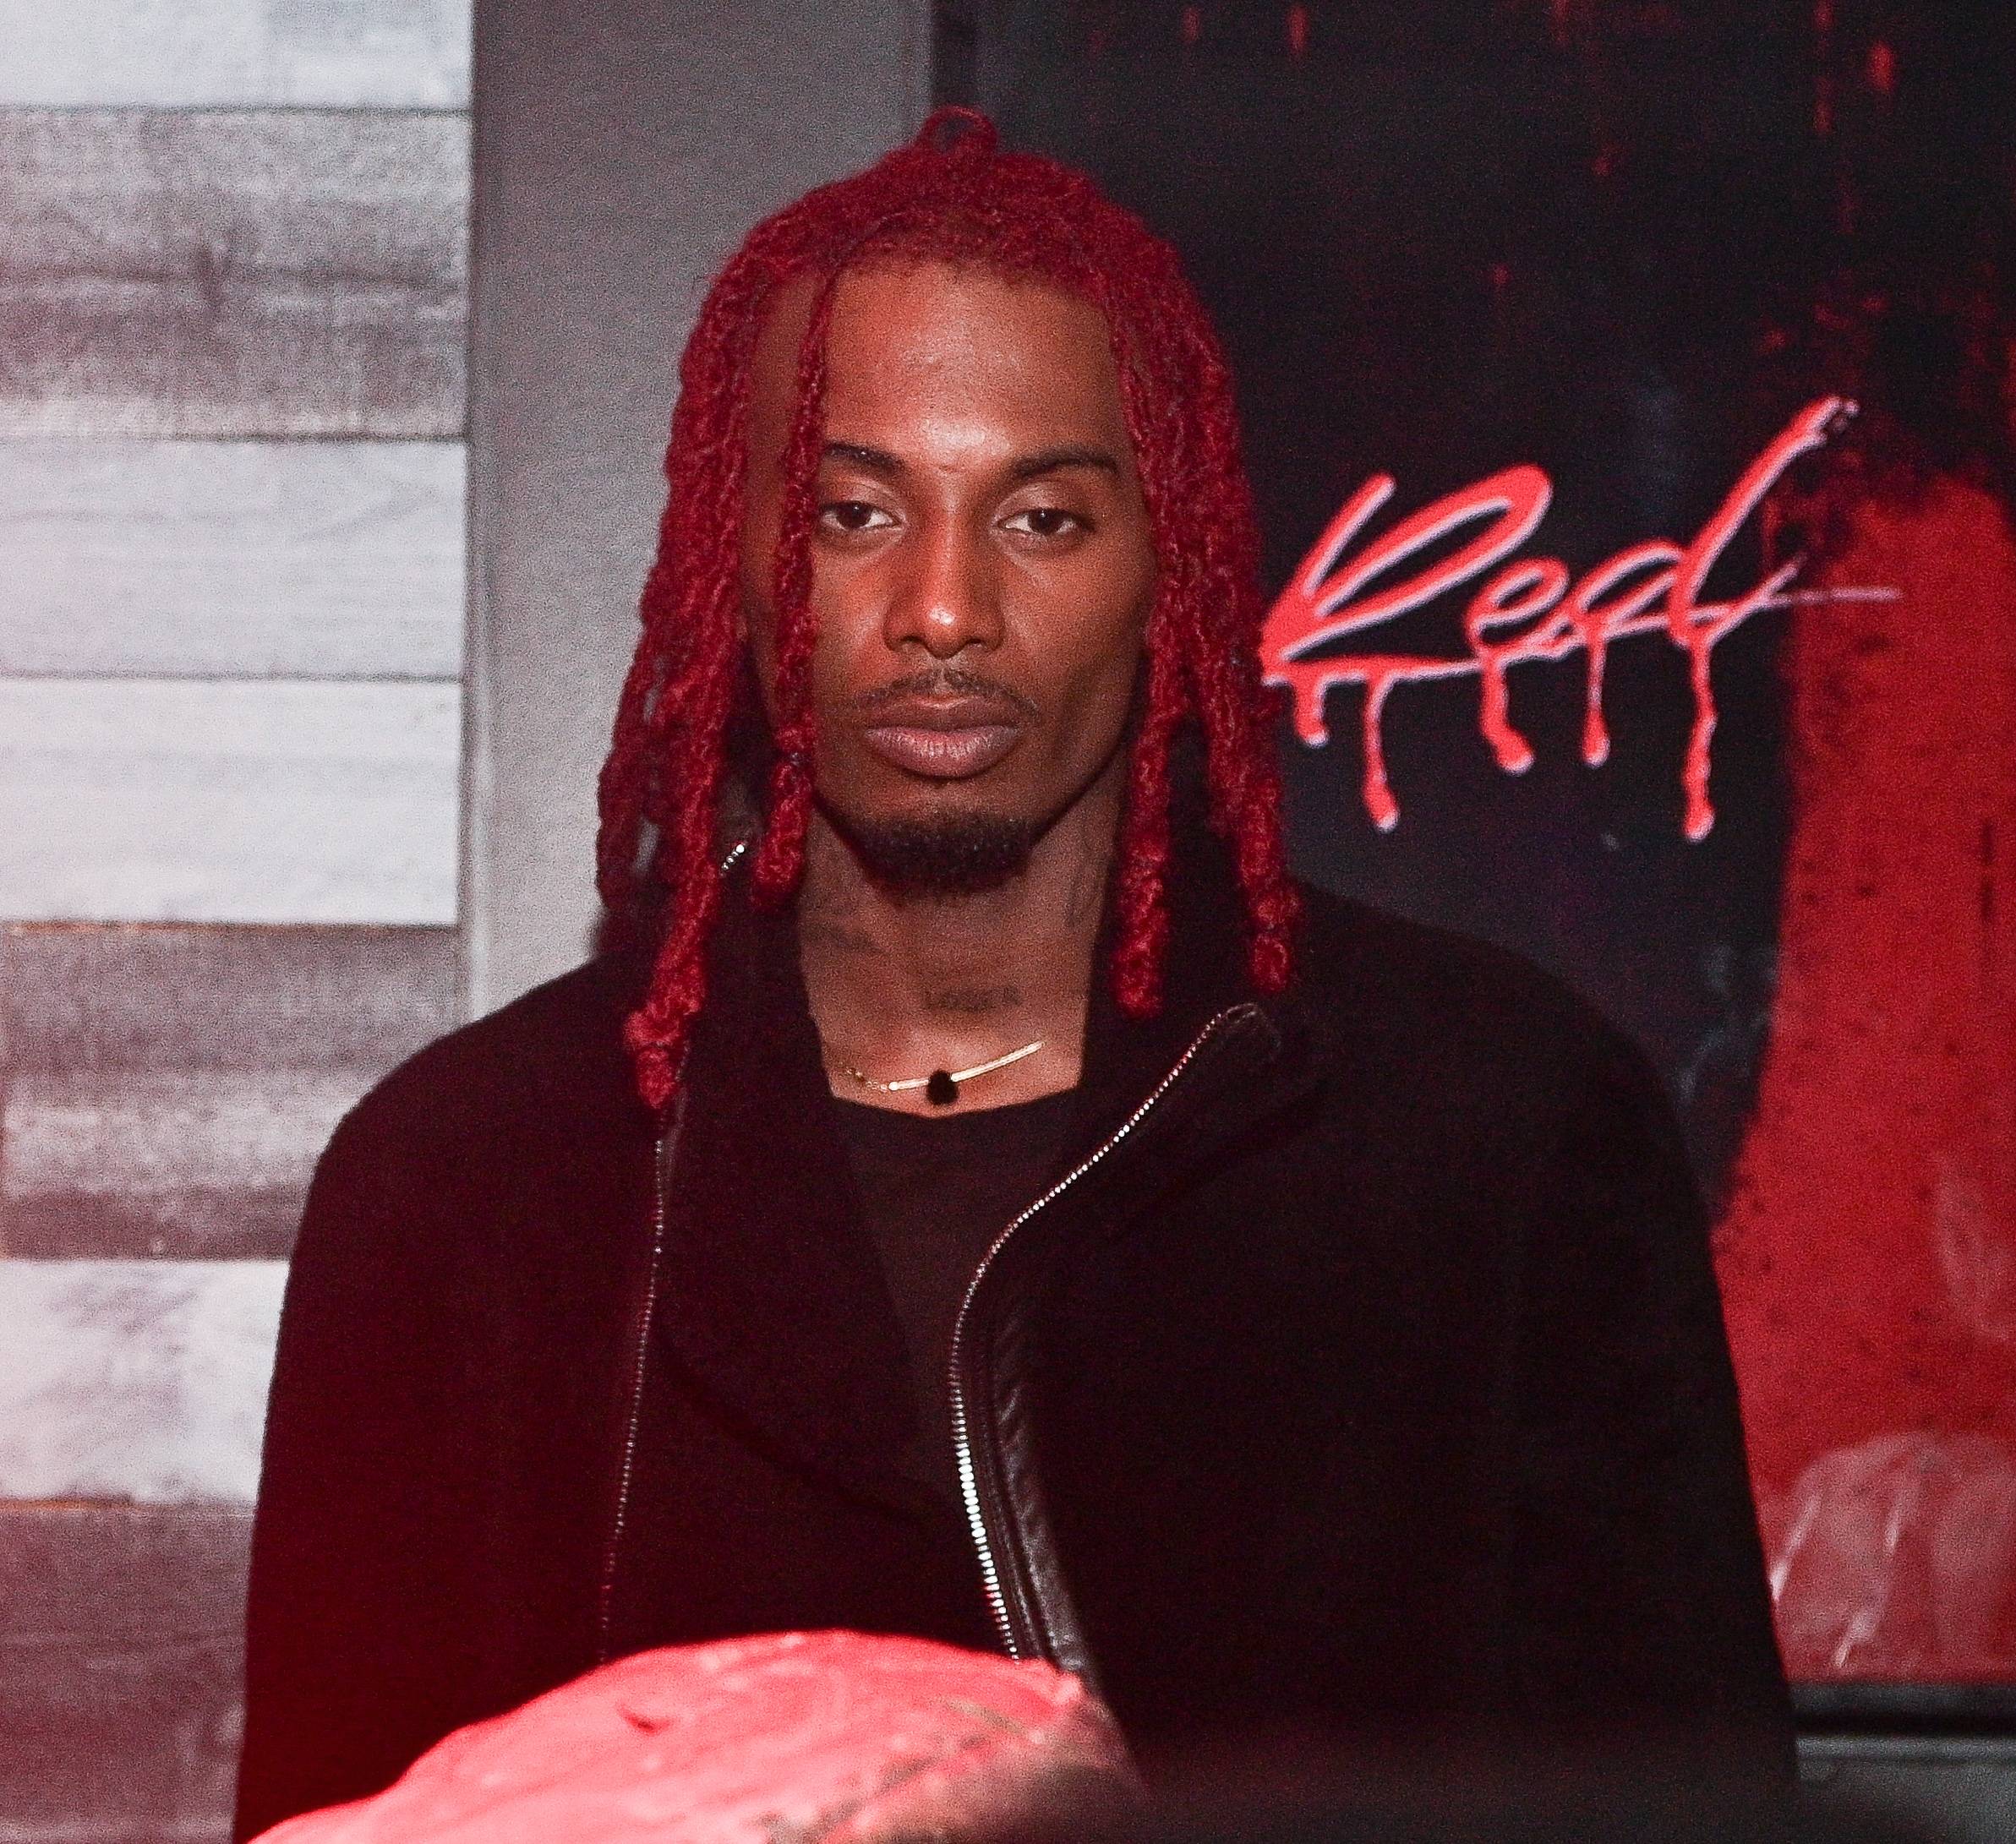 Playboi Carti's 'Whole Lotta Red' Is Now Certified RIAA Gold